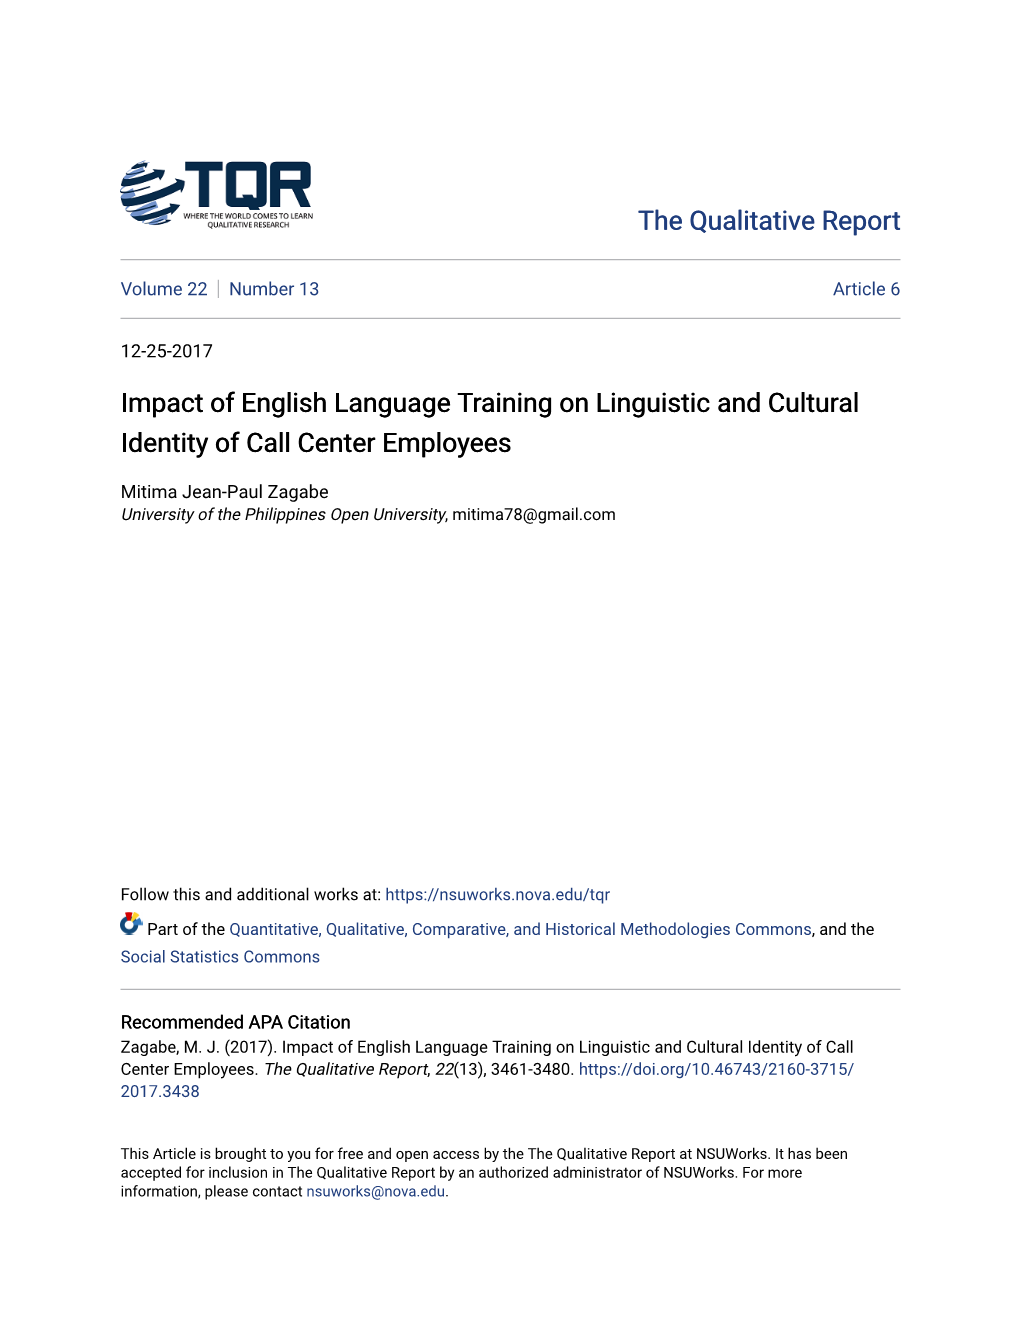 Impact of English Language Training on Linguistic and Cultural Identity of Call Center Employees